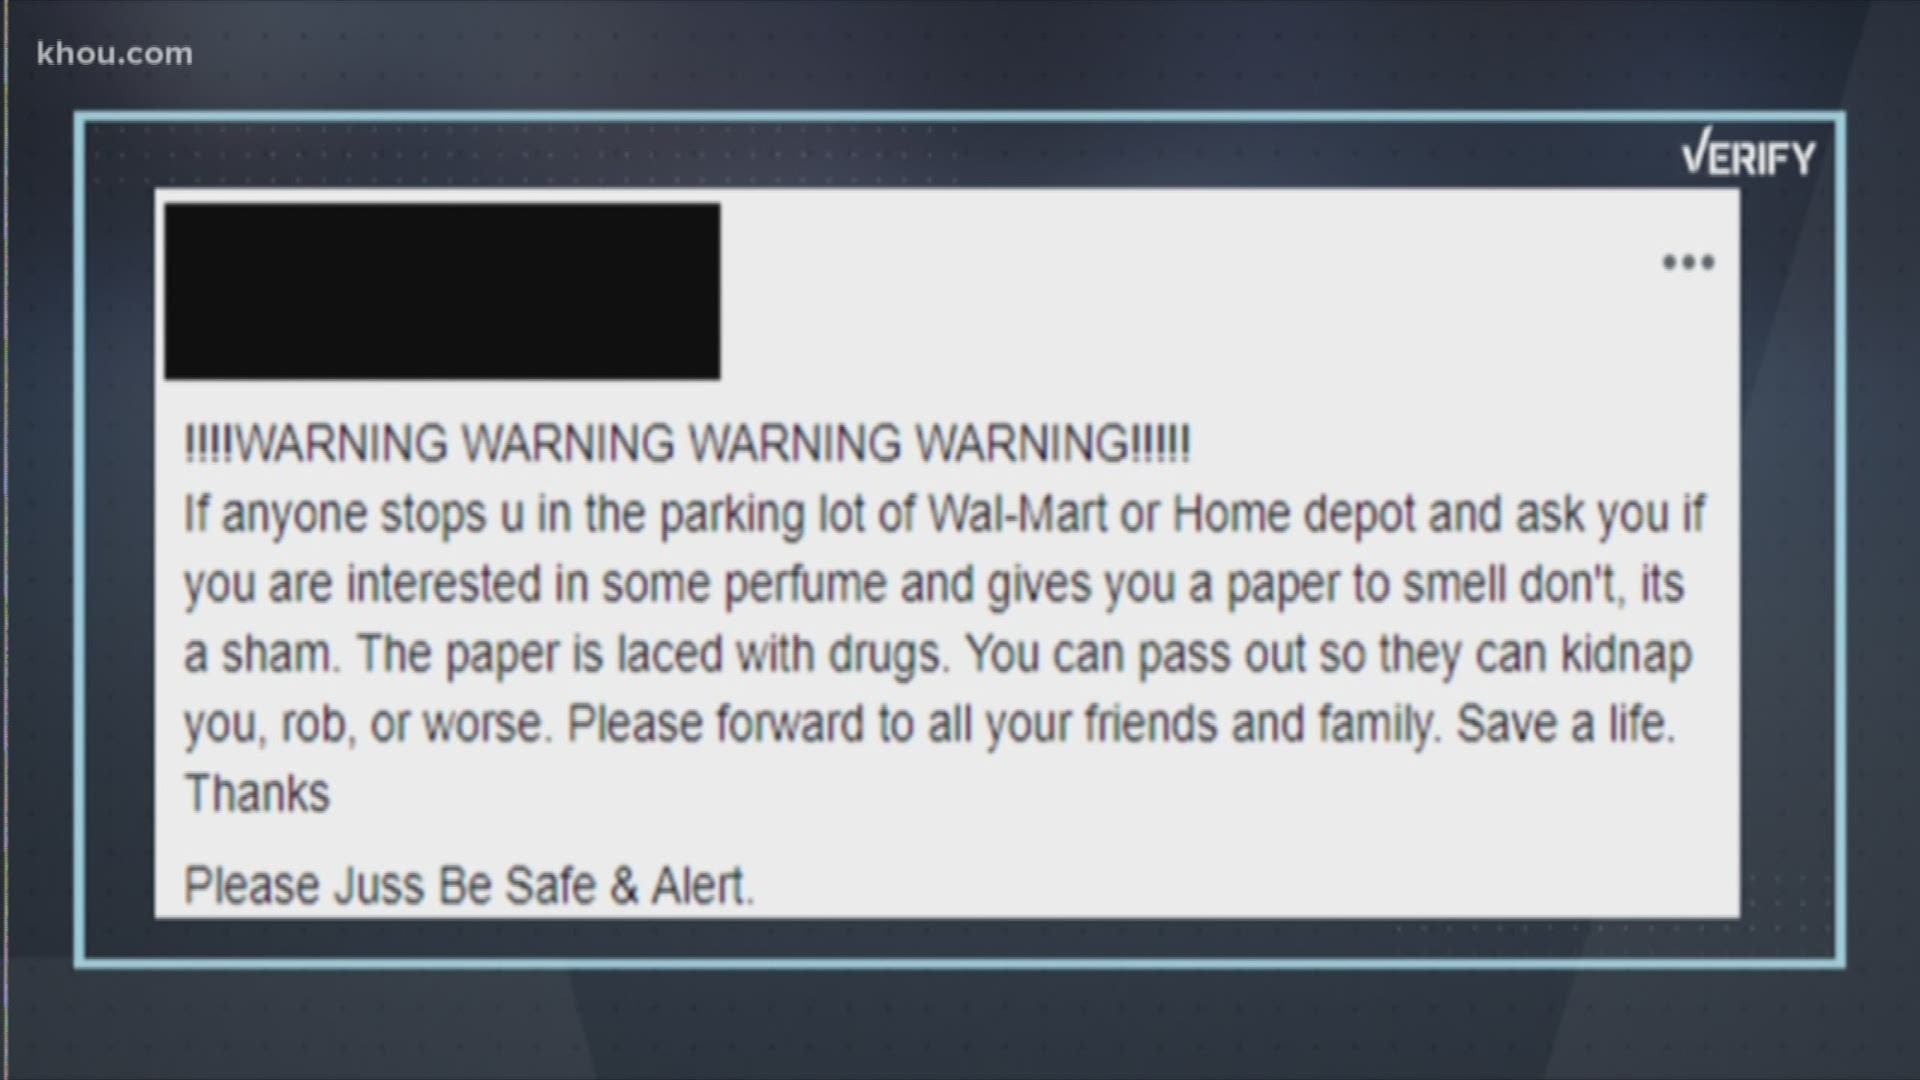 A scary sounding warning has been making the rounds on Facebook. Have you seen this one? It claims that criminals are hanging out in Walmart and Home Depot parking lots pretending to sell perfume. However, the paper tester they want you to sniff is laced